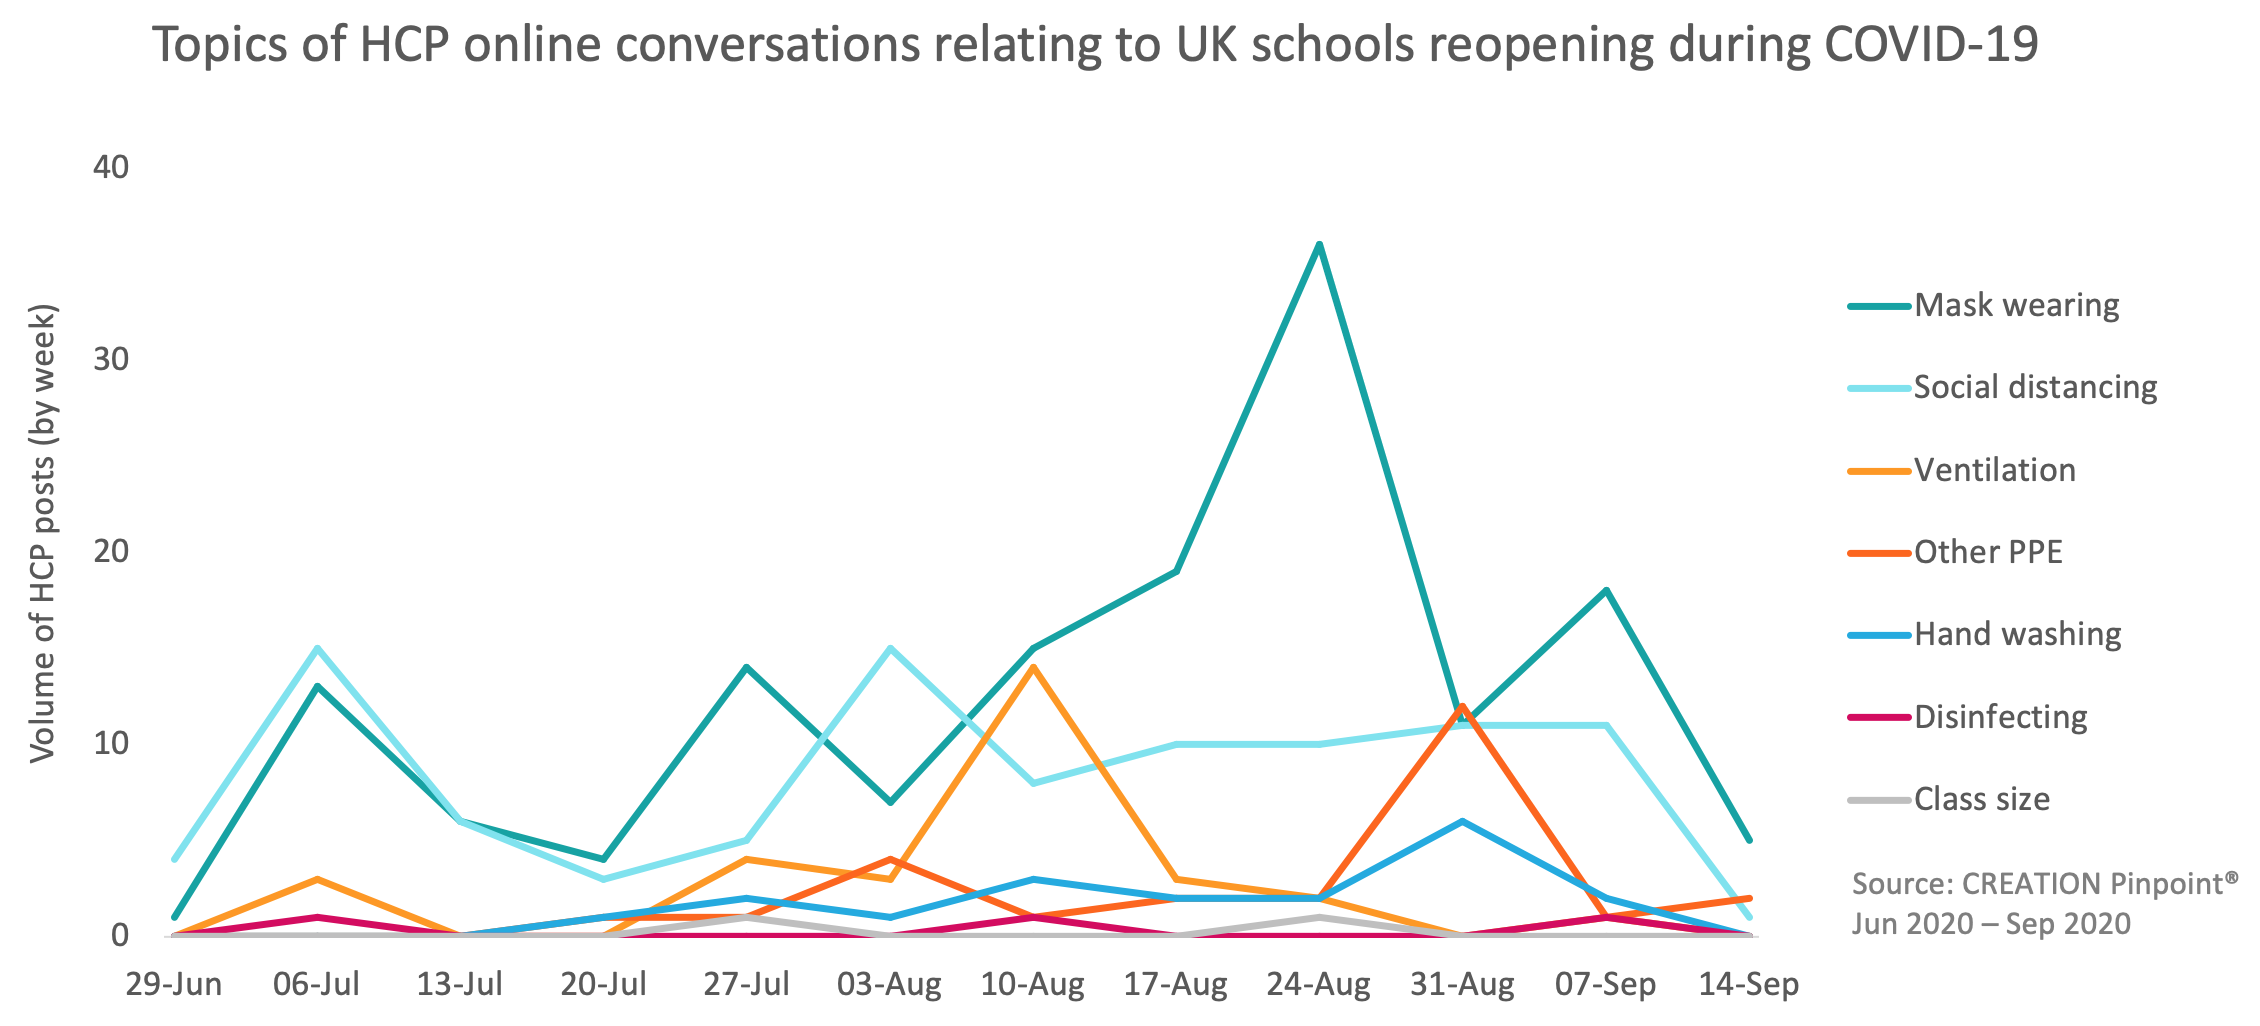 Topics of HCP online conversations relating to UK schools reopening during COVID-19